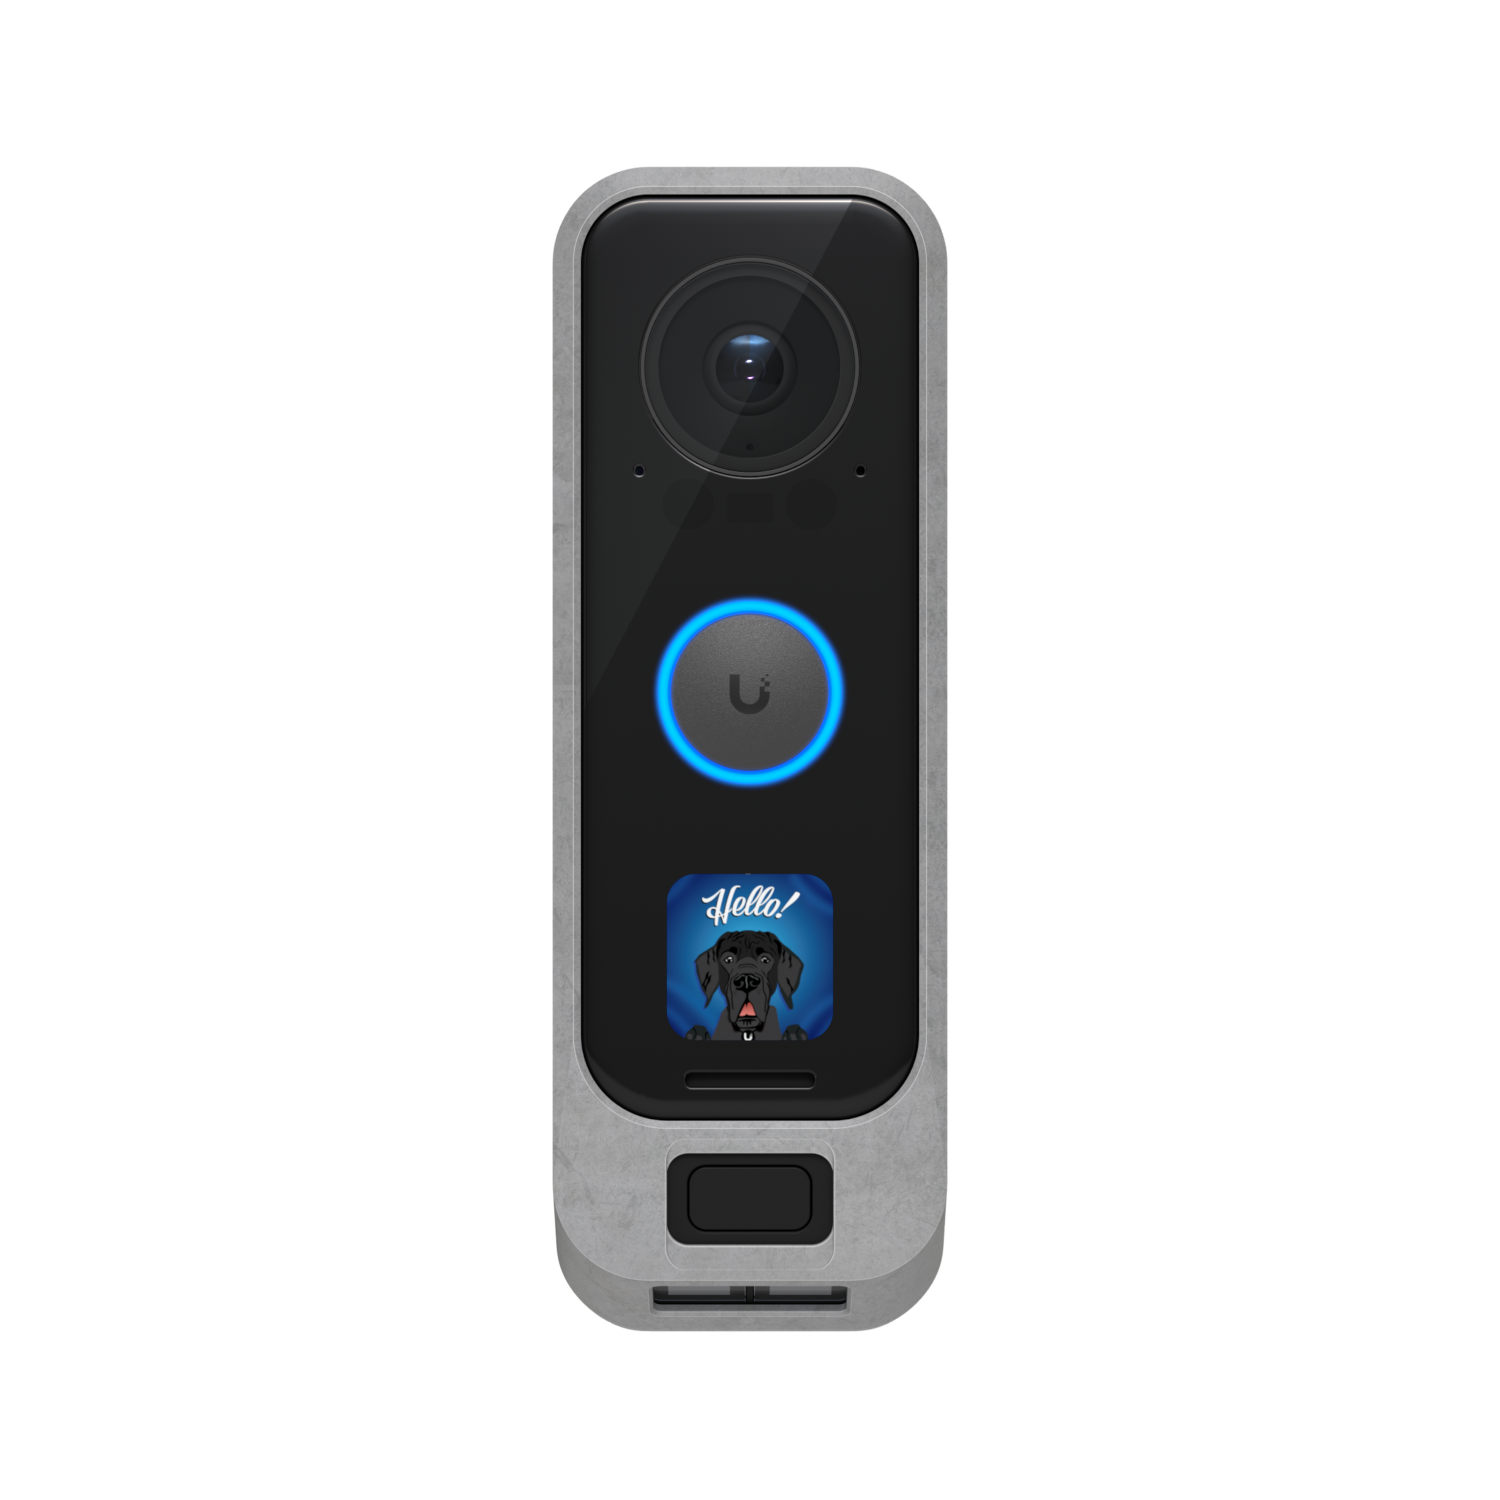 Ubiquiti Unifi G4 Doorbell Pro Cover/for the G4 Doorbell Pro/ UACC-G4-DB-Pro-Cover-Concrete